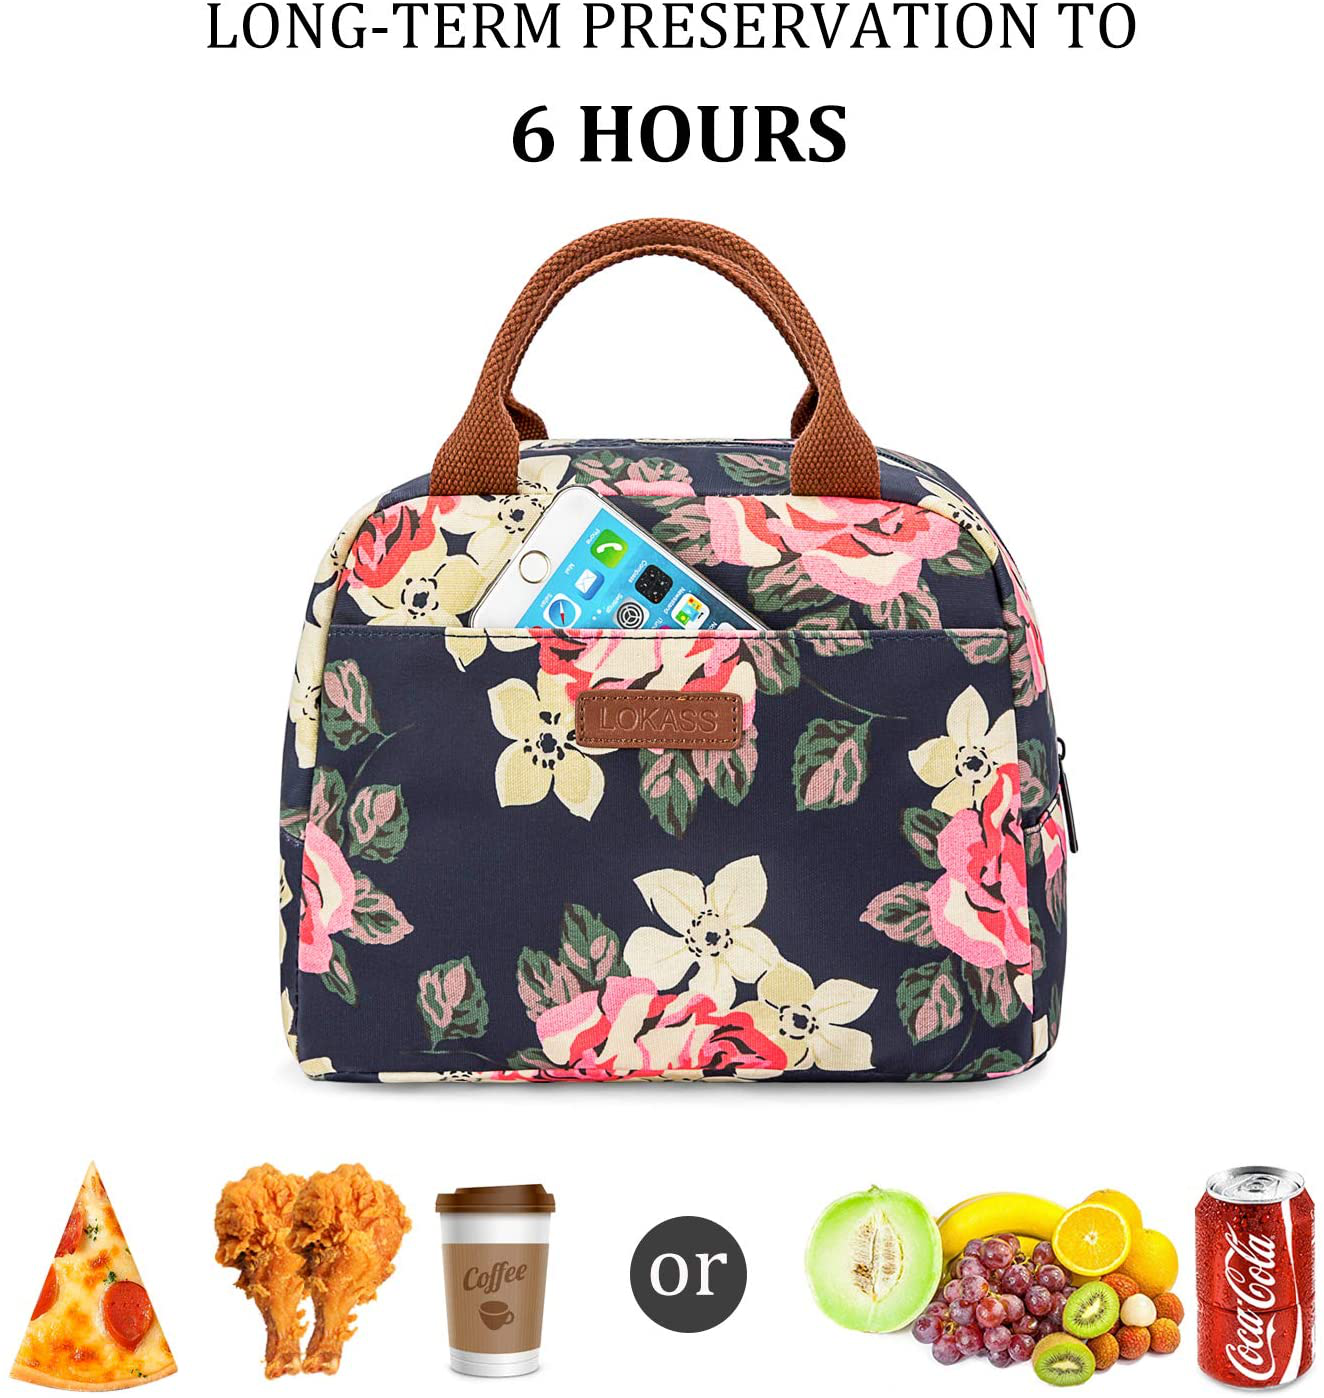 LOKASS Lunch Bag for women Insulated Lunch Tote Fashionable Cooler Bag Thermal Lunch Box with Detachable Shoulder Strap for Work/Picnic/Beach(Peony)